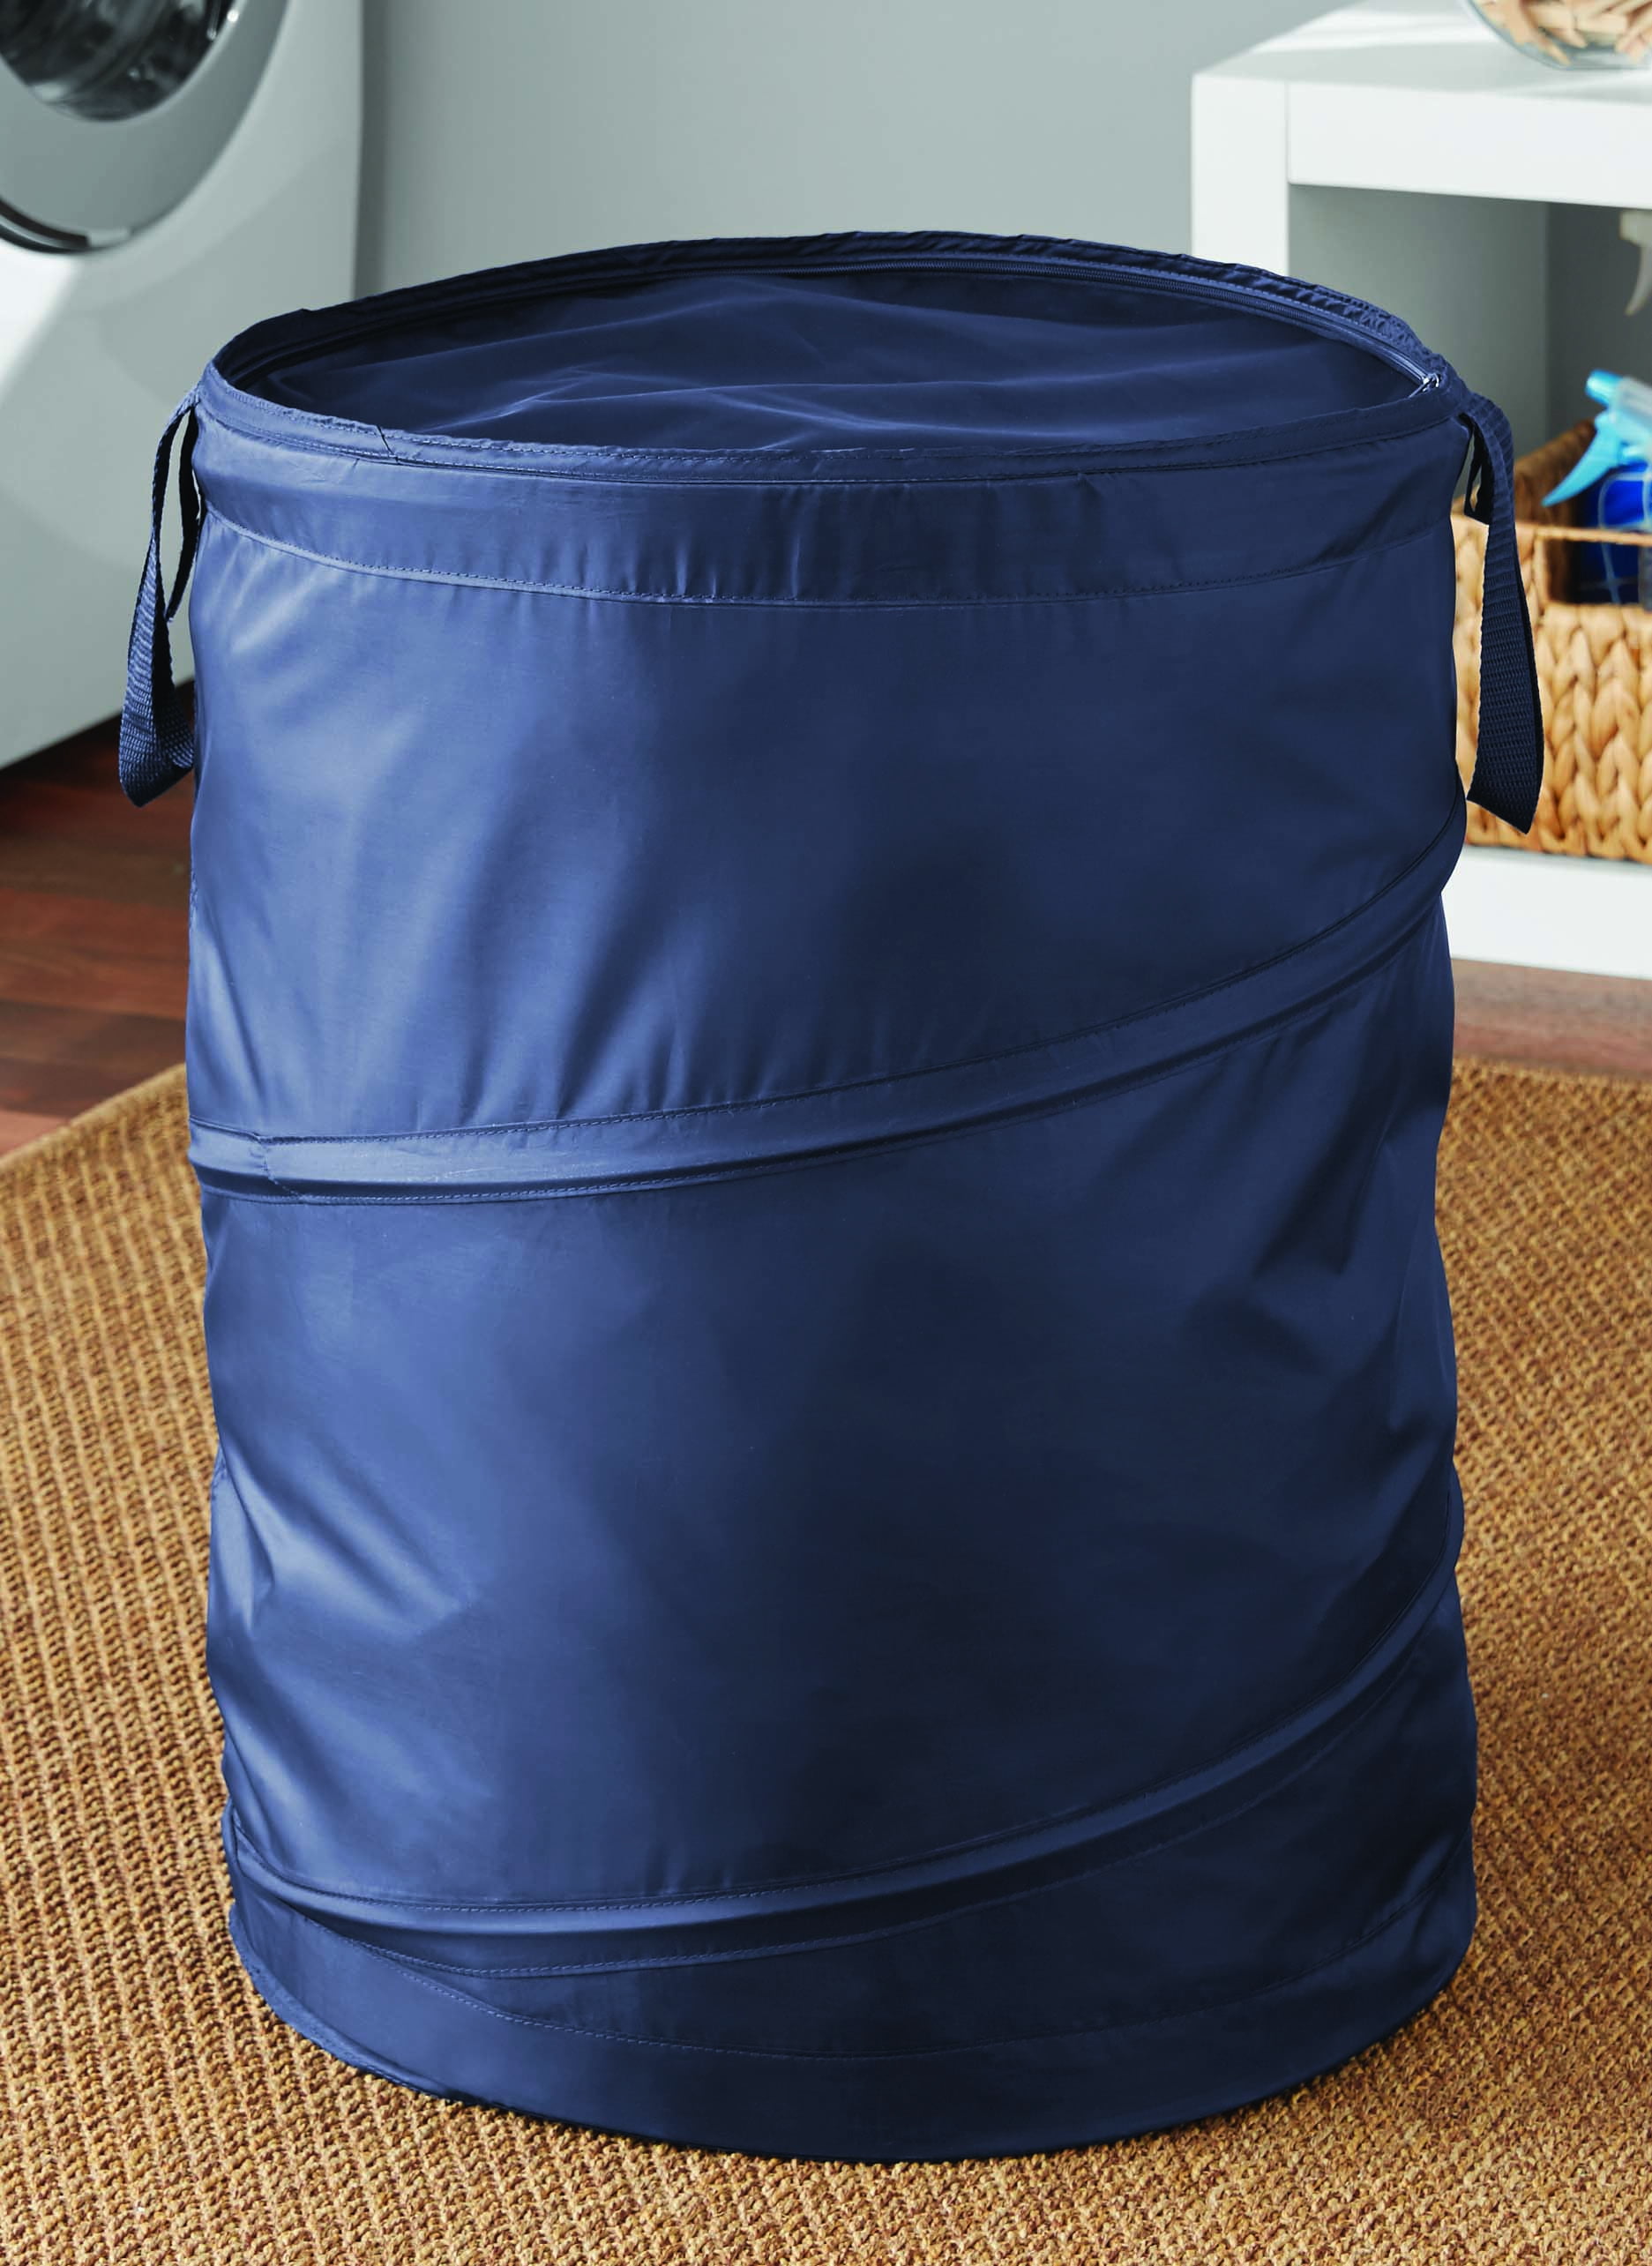 Mainstays Navy Polyester Spiral Pop-up Laundry Hamper with Zipper Lid ...